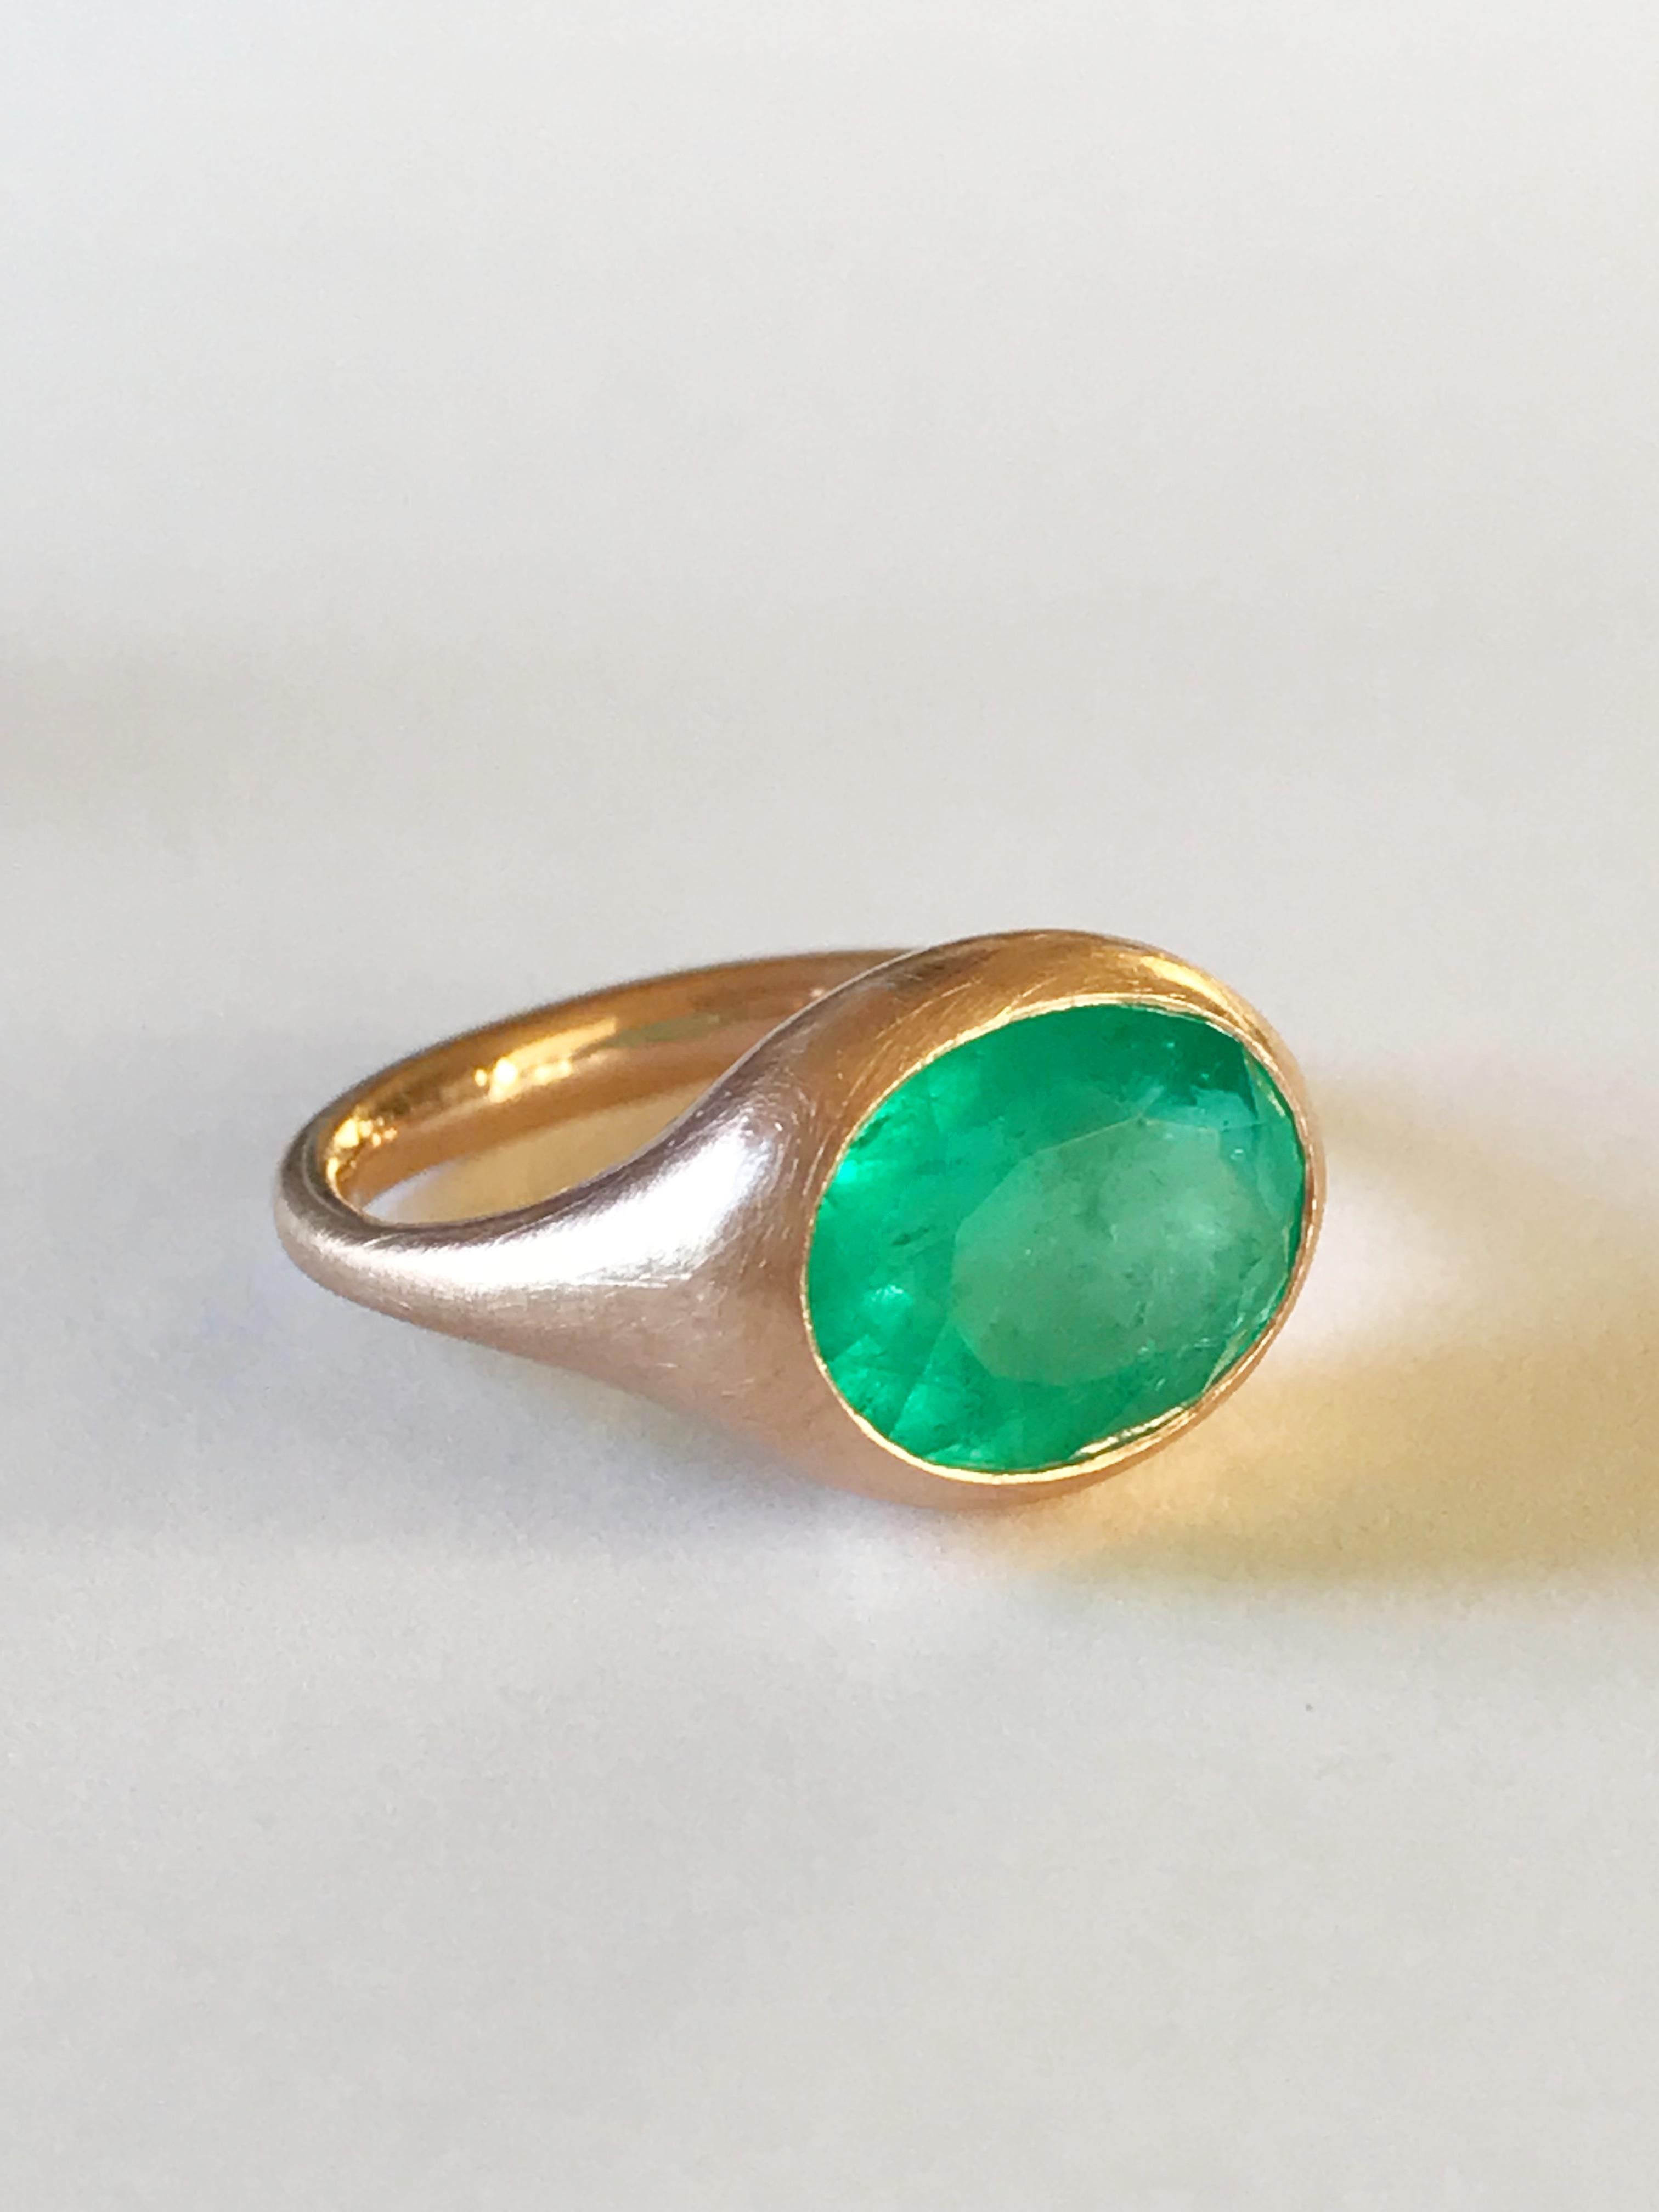 Dalben design One of a Kind 18k rose gold matte finishing ring with a light green 5,26 carat bezel-set oval faceted cut emerald. 
Ring size 7 1/4 USA - EU 55 re-sizable to most finger sizes. 
Bezel stone dimensions :
height 11,7 mm
width 14,4 mm
The